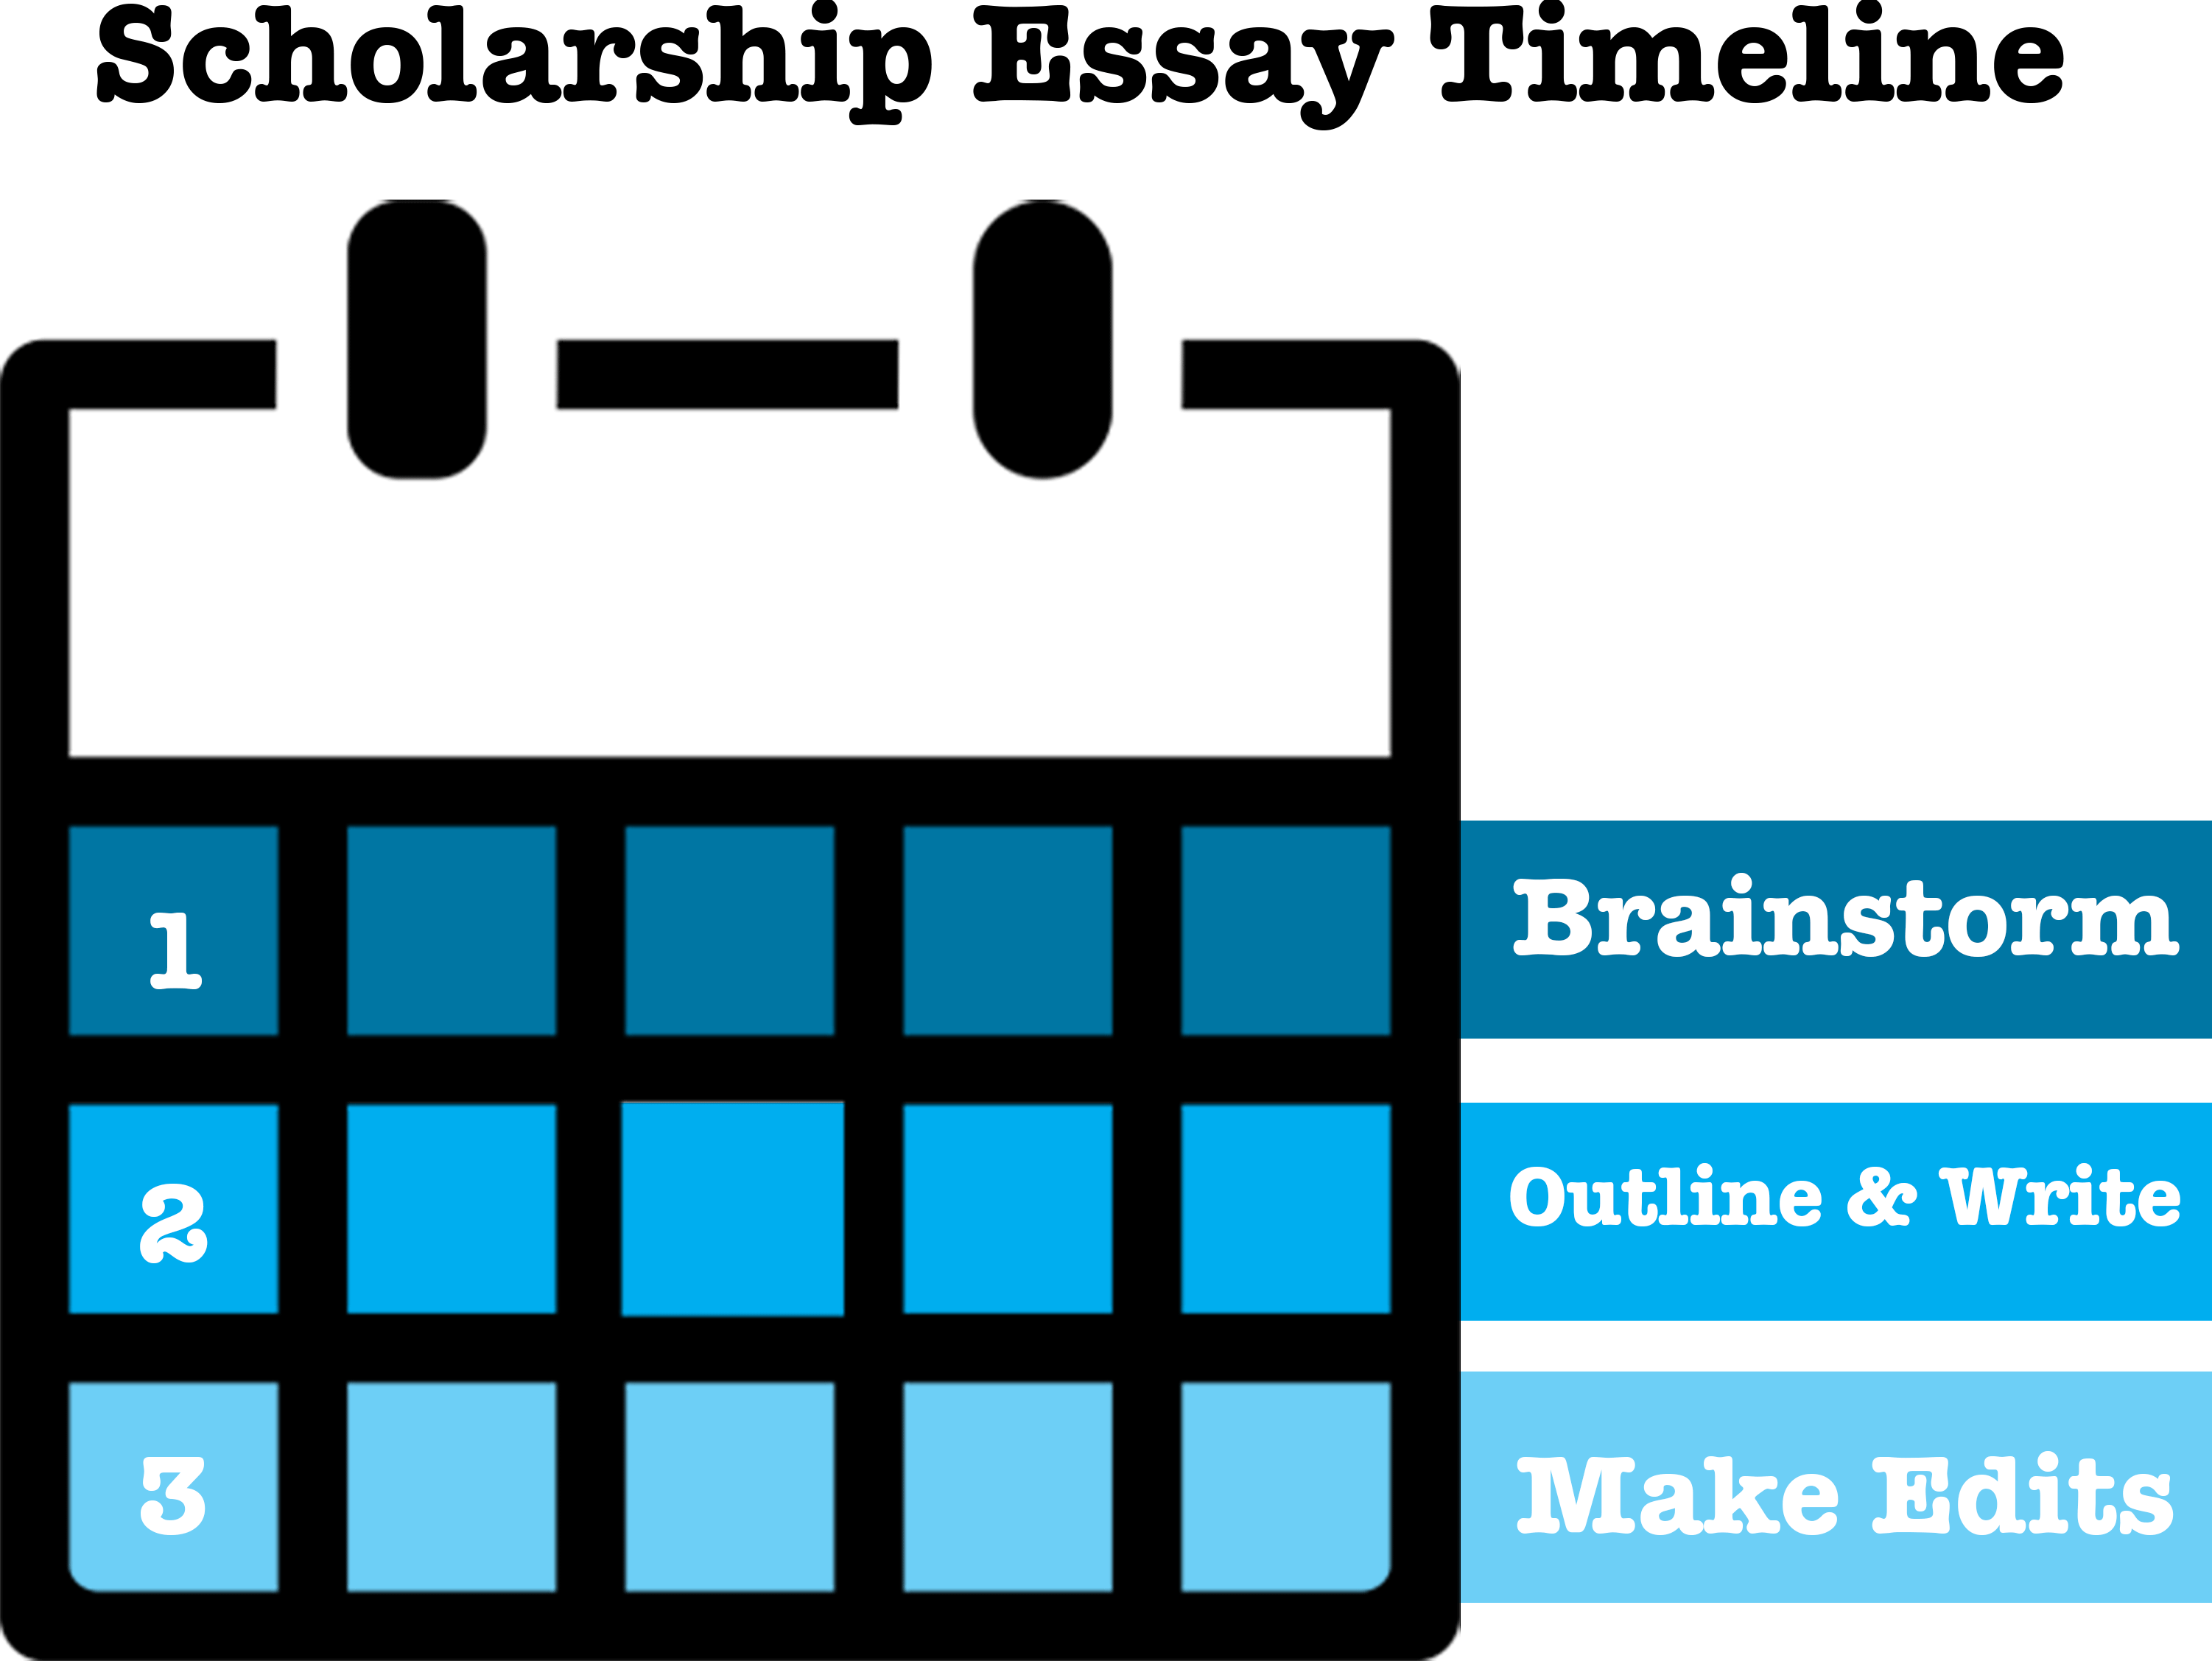 [essay] how does a scholarship help me ralize my full 